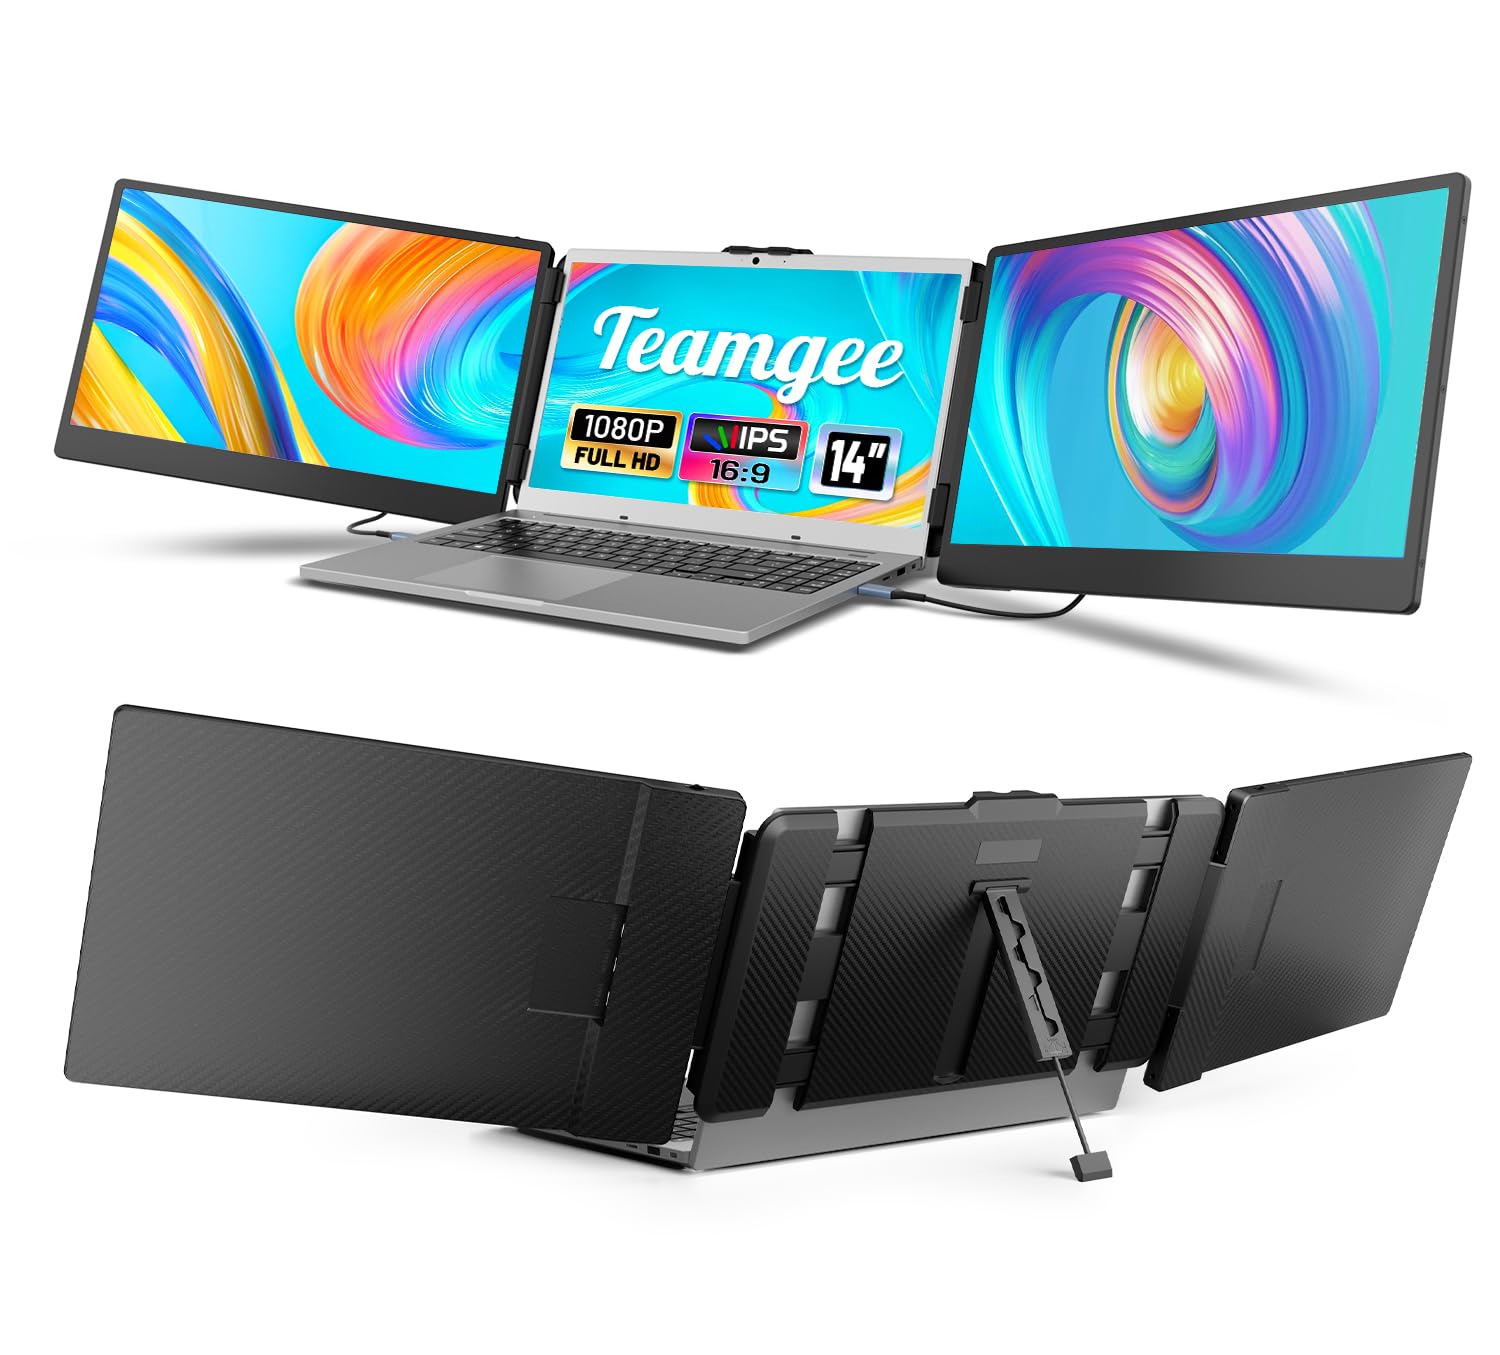 Teamgee Portable Monitor 14” FHD 1080P IPS Laptop Screen, 53% OFF